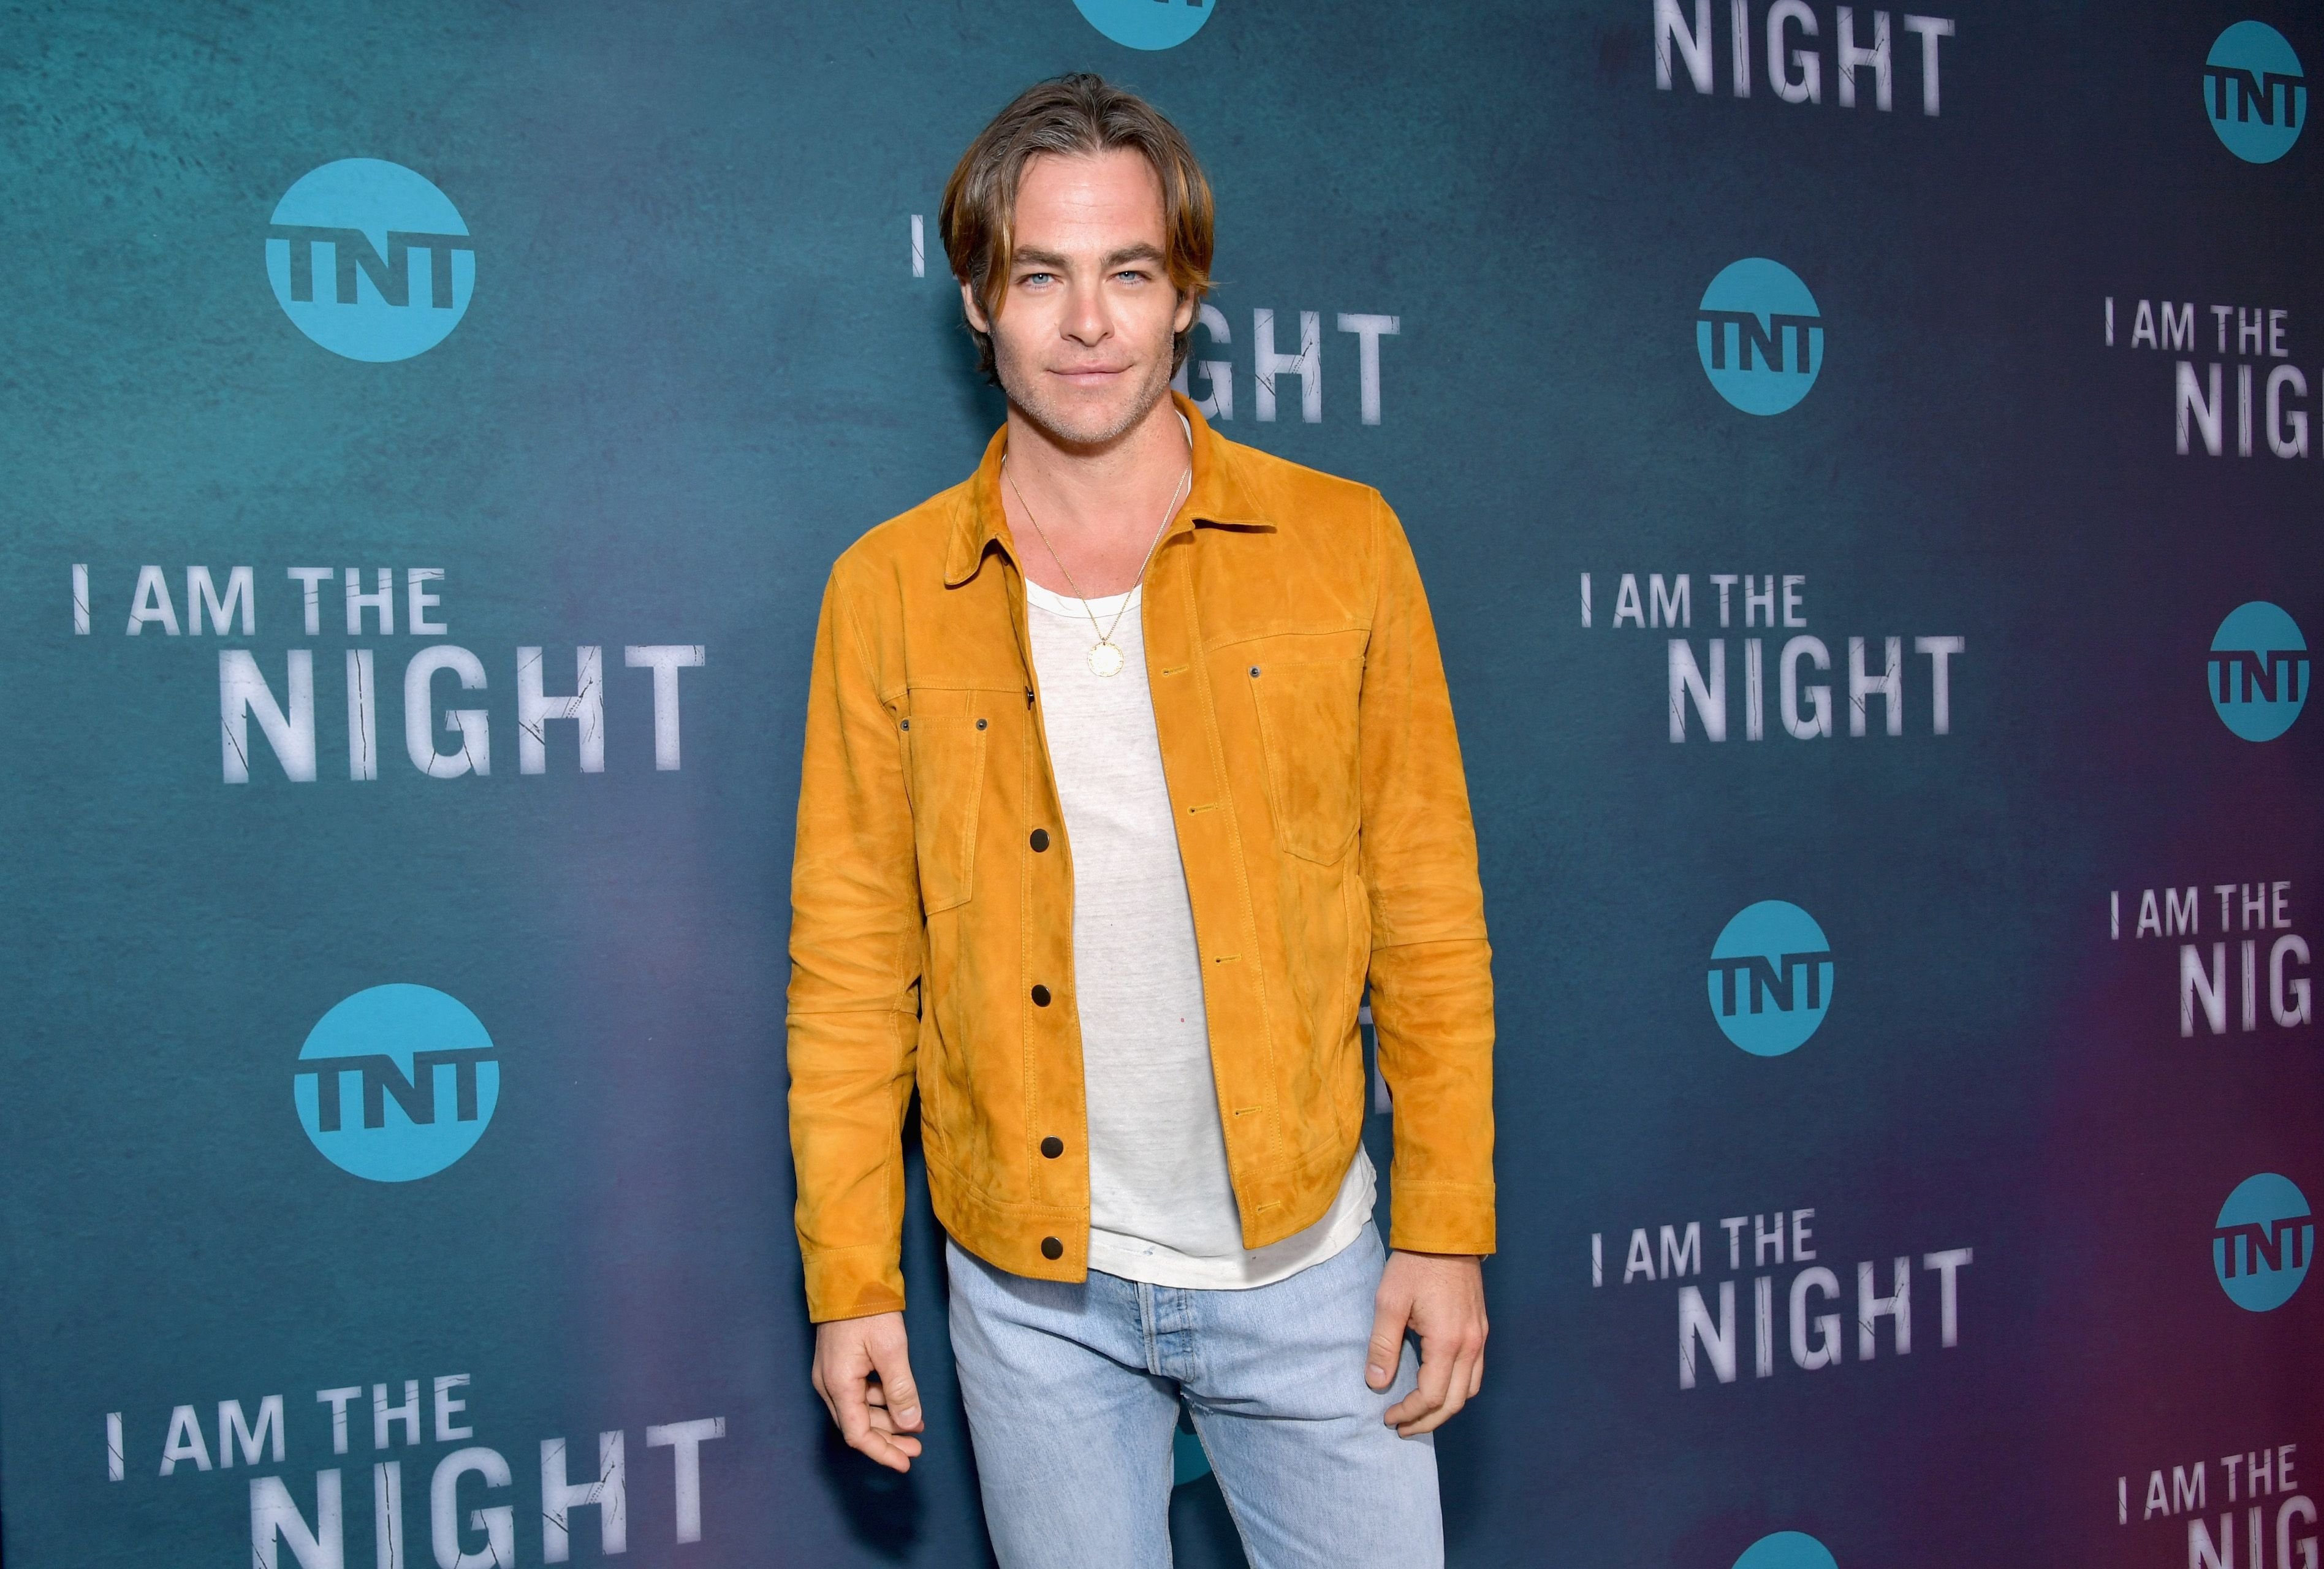 Chris Pine during the TNT's "I Am The Night" EMMY For Your Consideration Event at the Television Academy on May 09, 2019, in Los Angeles, California. | Source: Getty Images